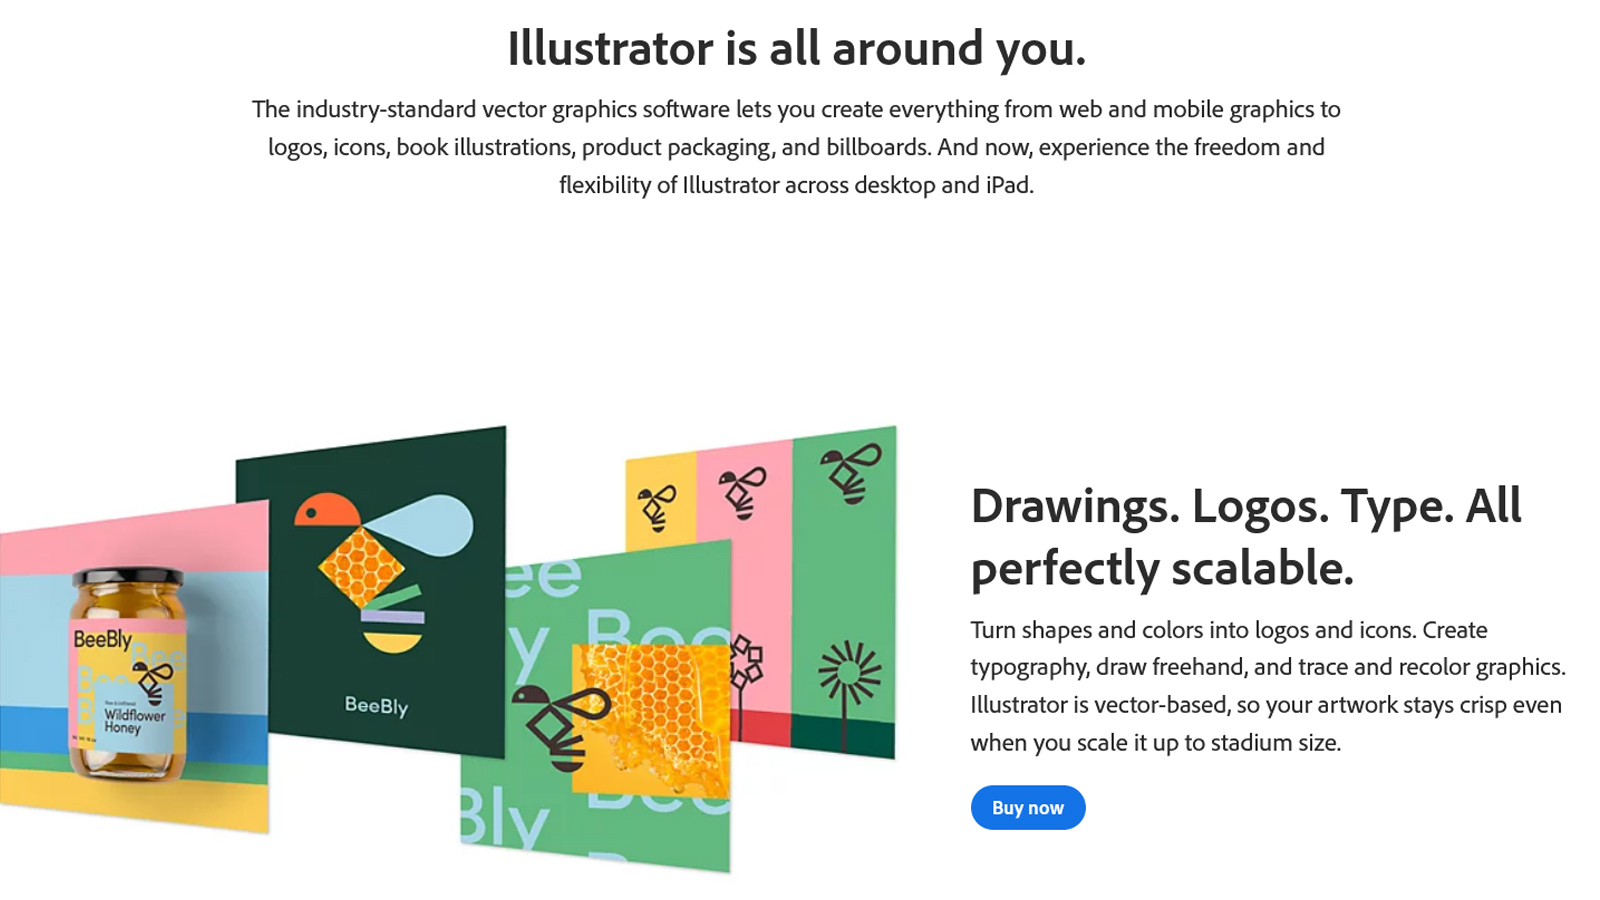 Get feedback from a vast remote working audience about Adobe Illustrator